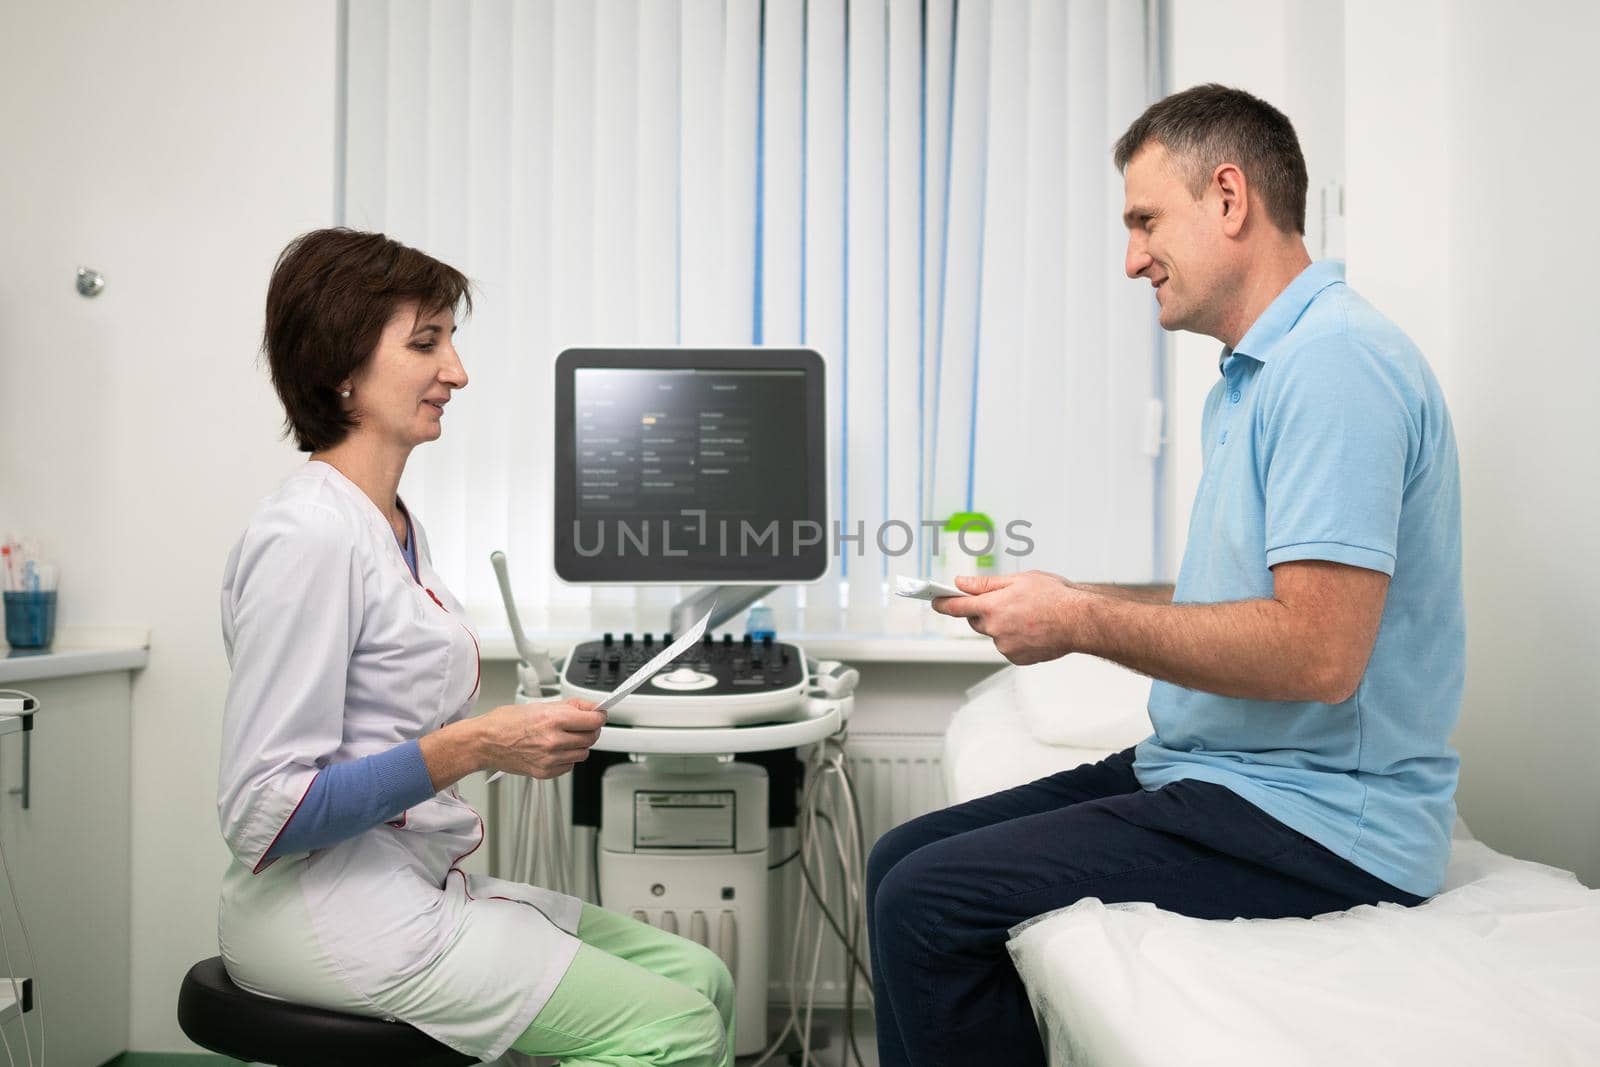 Doctor cardiologist in the office of ultrasound diagnostics with the patient examines medical tests during a health check-up in a modern clinic. Medical consultation. healthcare, medical service.